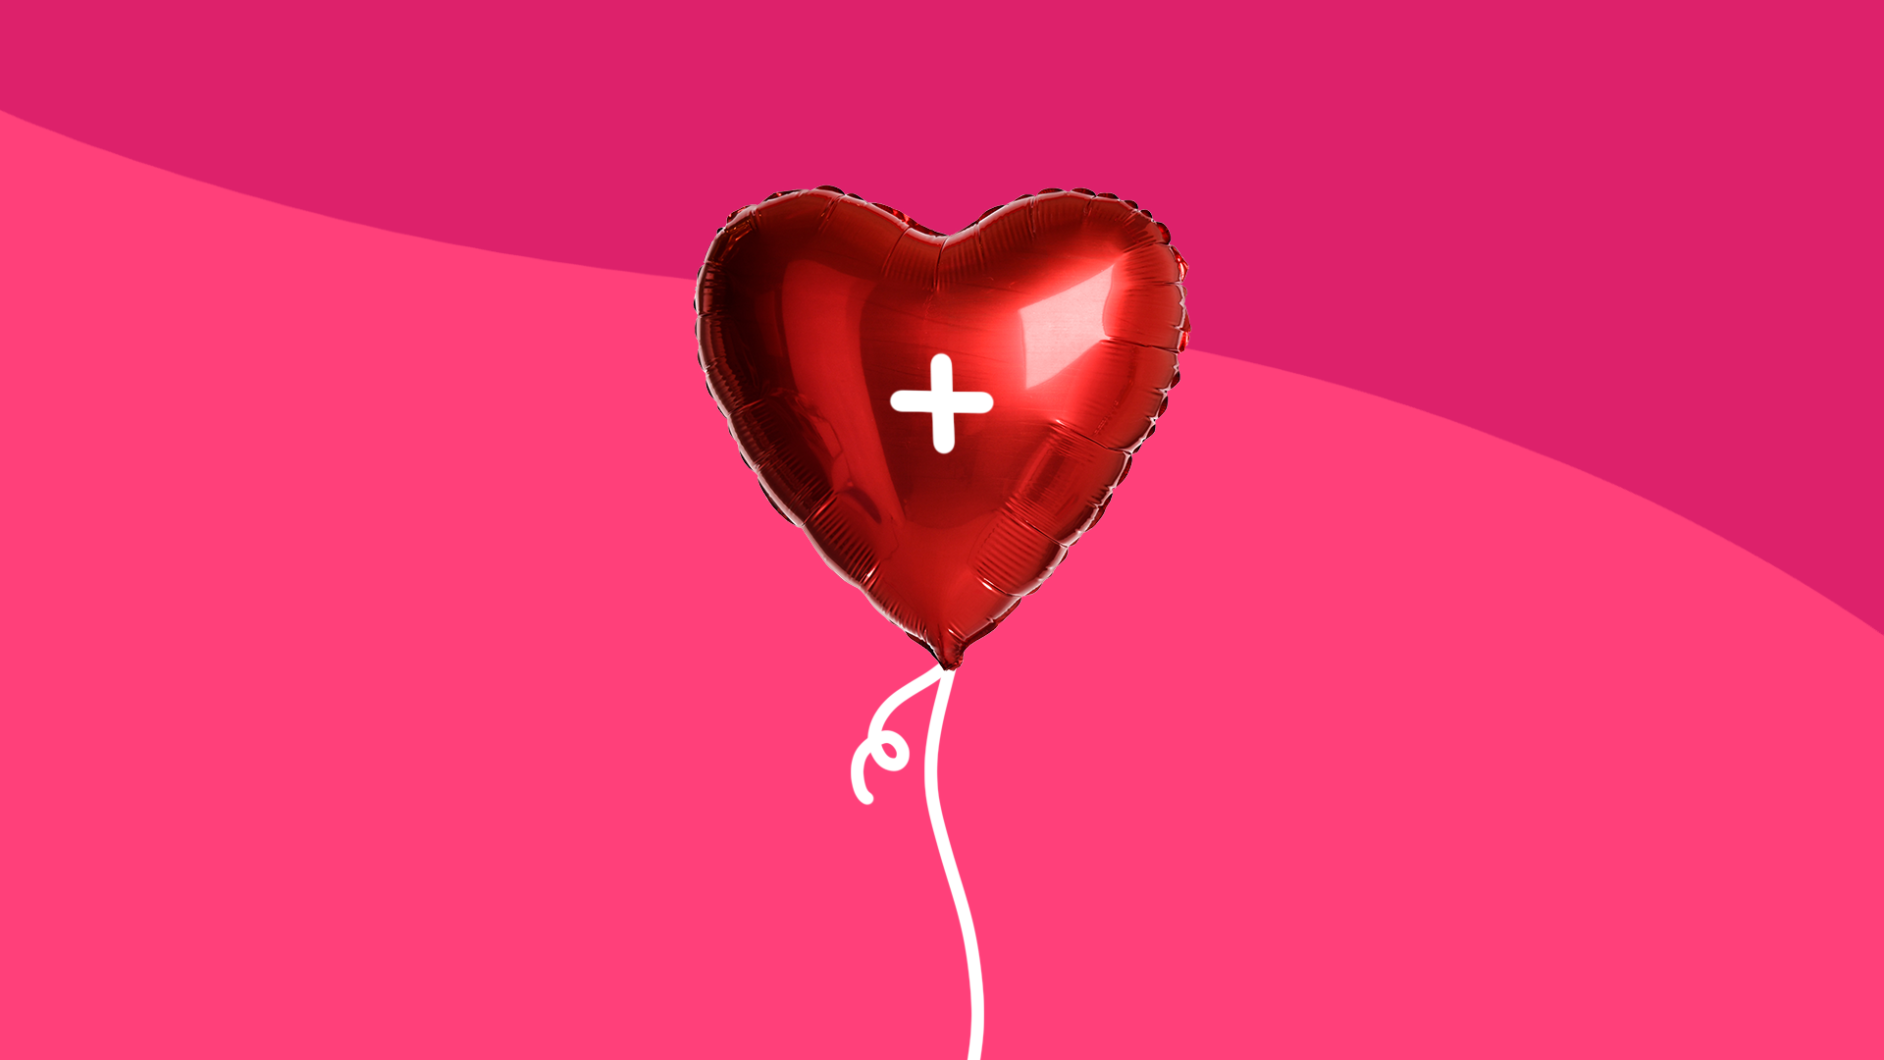 Red heart-shaped balloon: Normal heart rate